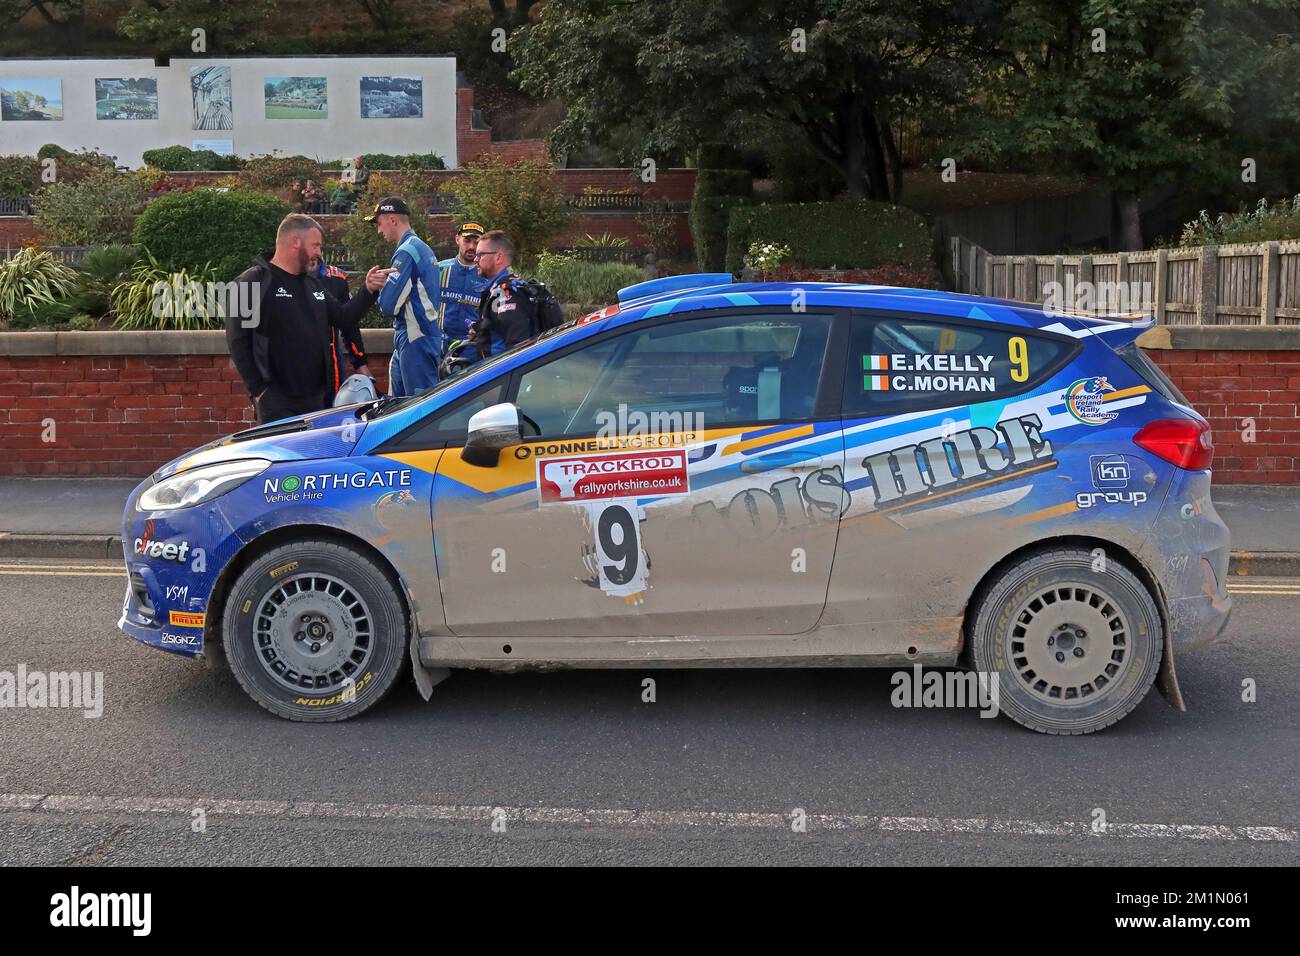 Car 9 - Eamonn Kelly Drumbarron - Conor Mohan Ballinode, Stage à Filey 24th septembre 2022, Yorkshire Trackrod Motor Club Rally, Angleterre, Royaume-Uni Banque D'Images